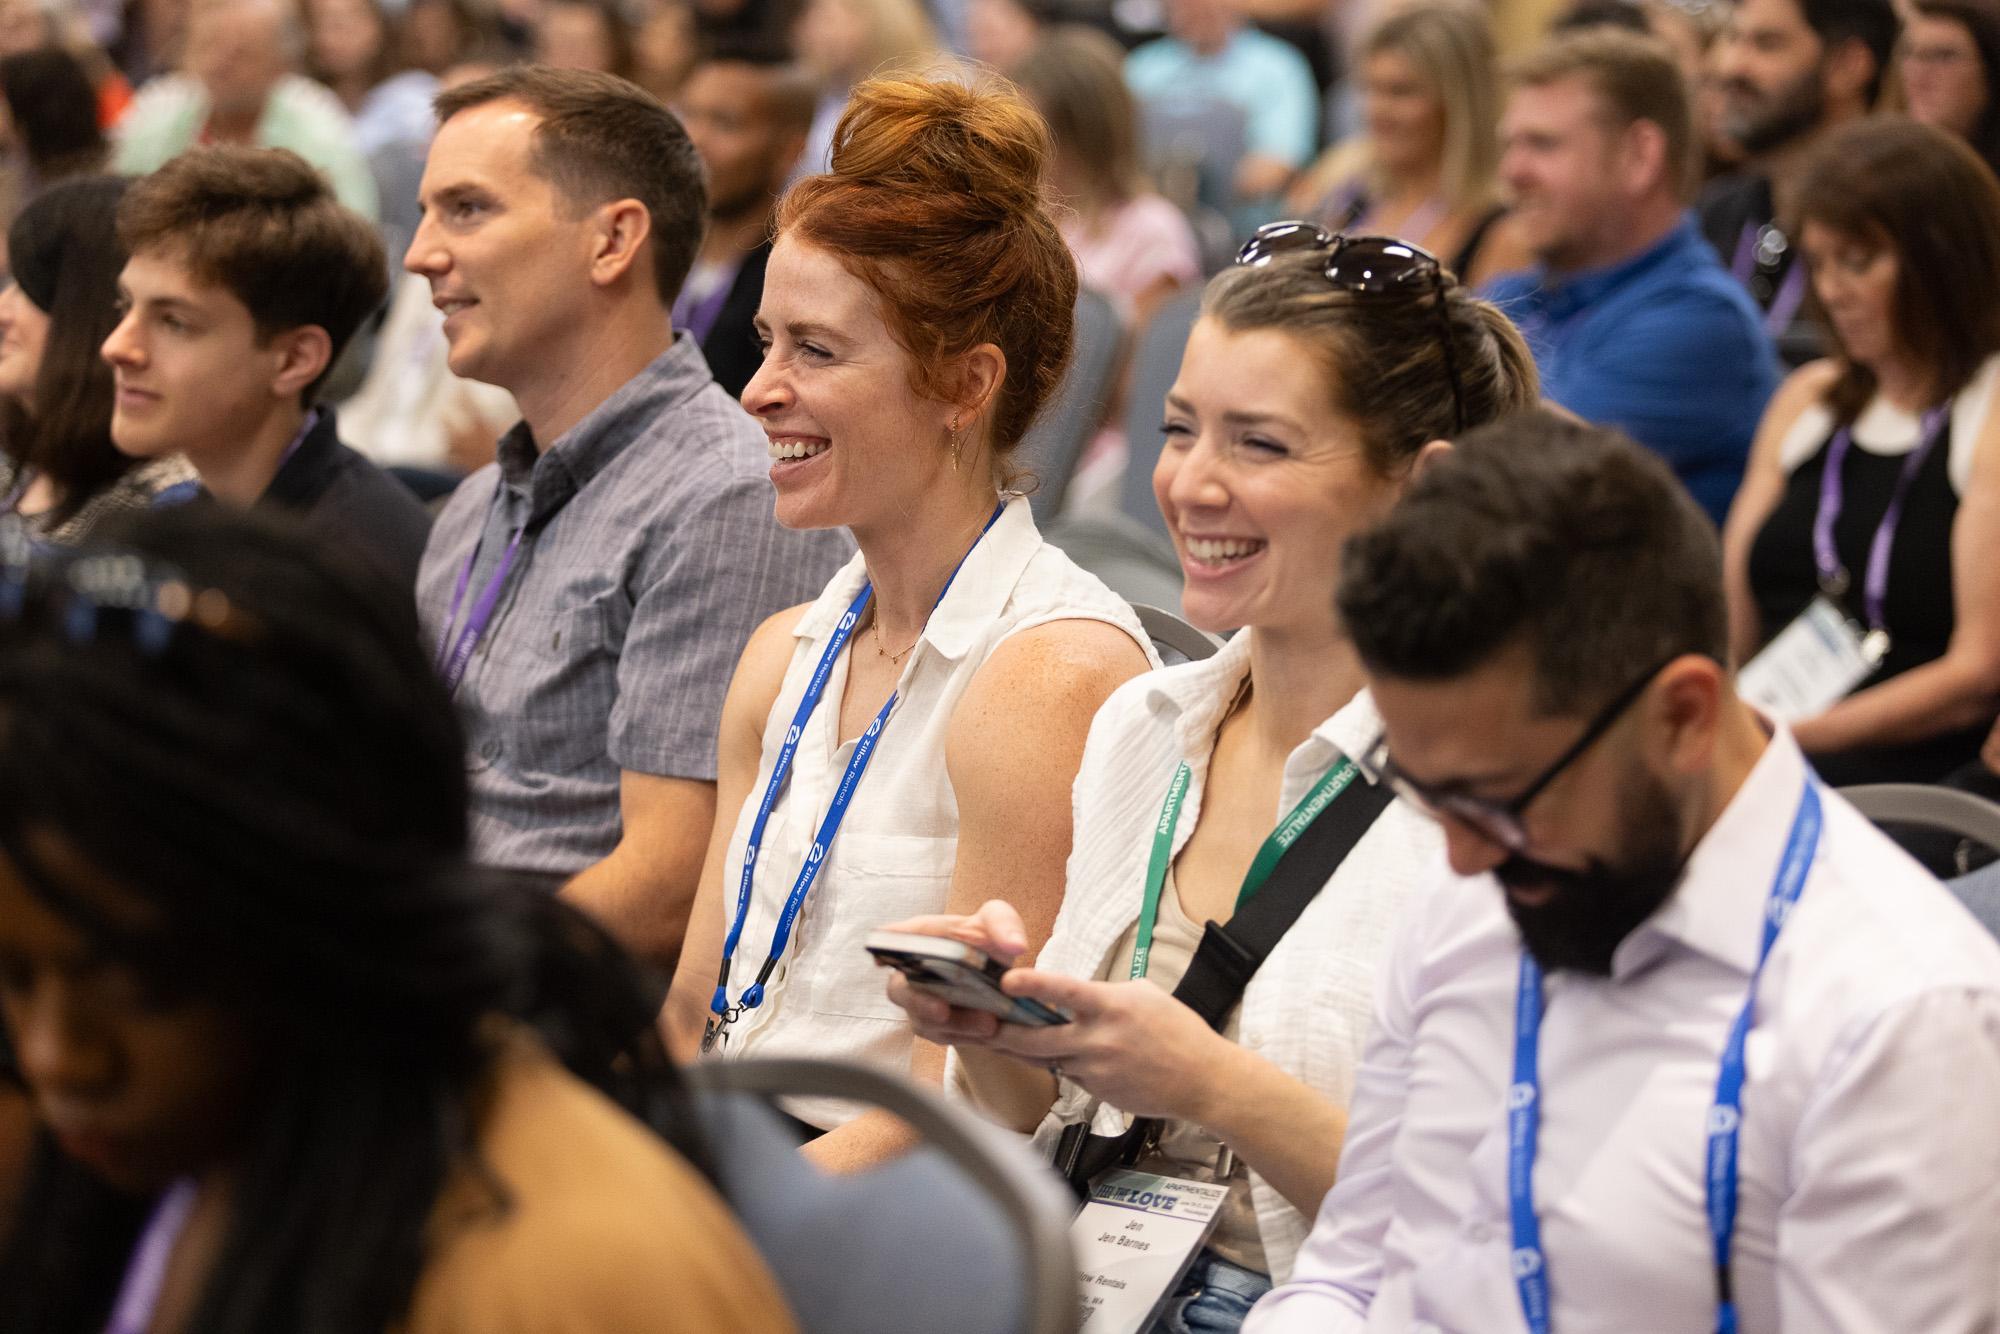 Attendees gather to learn the latest and greatest tips, tactics and strategies for rental housing professionals at Apartmentalize.